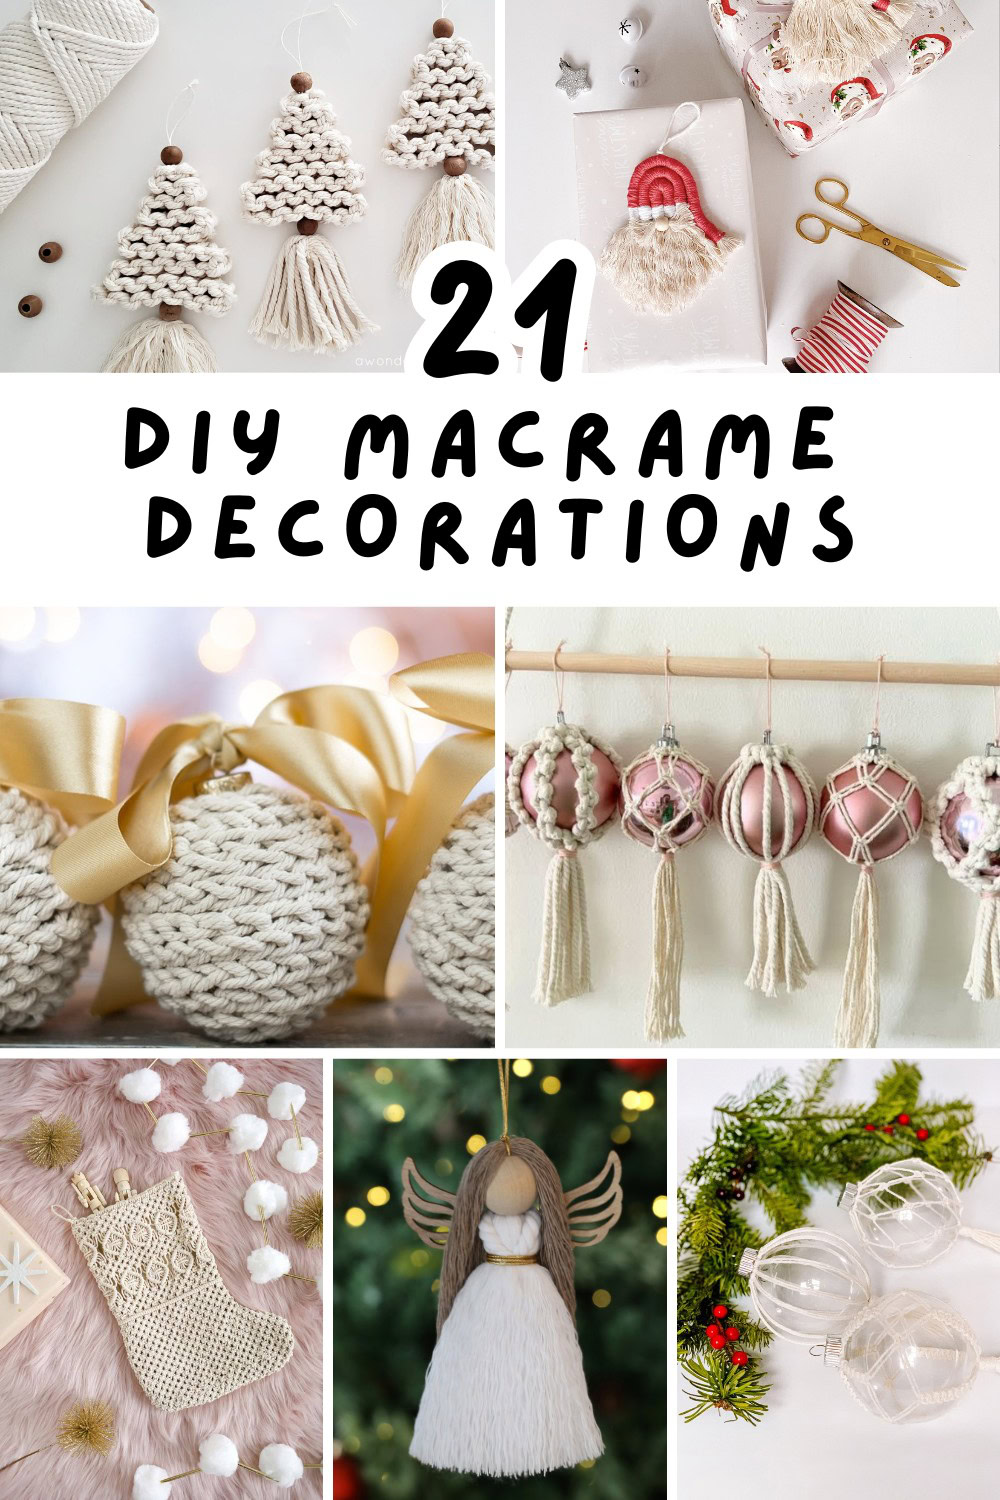 Get into the holiday spirit with these delightful macrame Christmas decorations! From intricate wall hangings to adorable ornaments, these DIY projects will add a handmade touch to your festive decor. Perfect for beginners and experienced crafters alike! 🧵🎅 #ChristmasCrafts #DIYHoliday